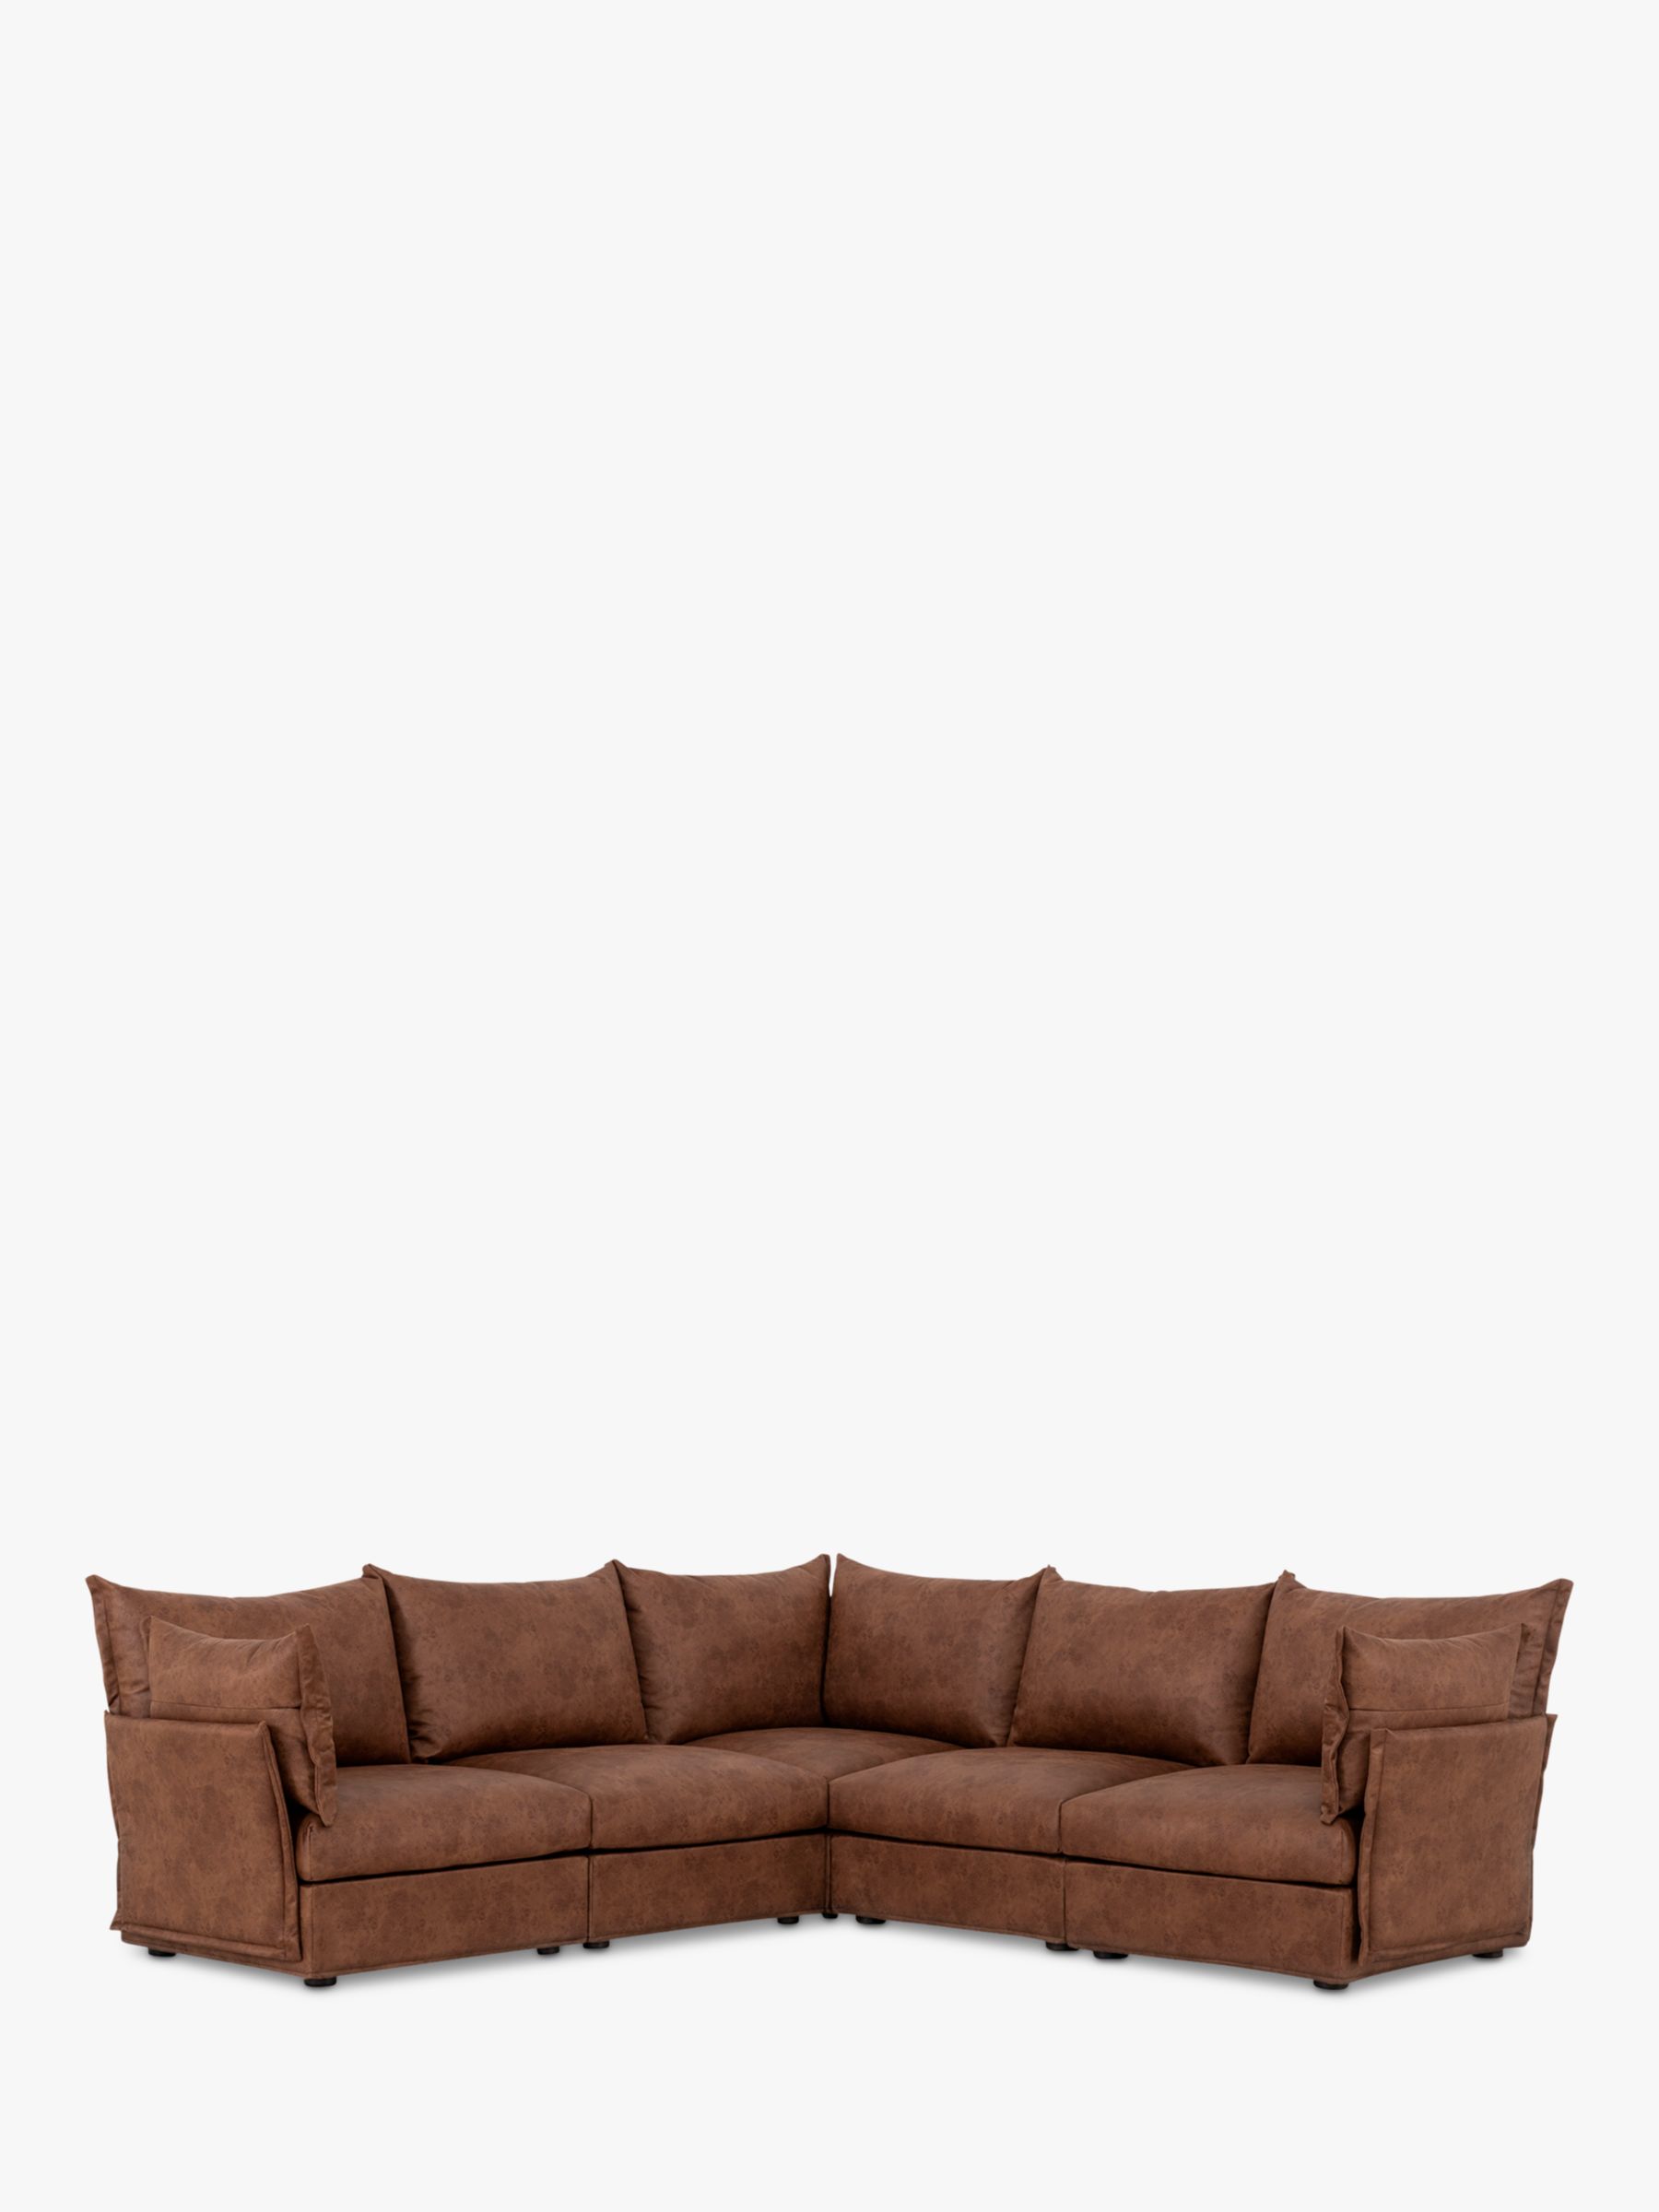 Photo of Swyft model 06 5+ seater faux leather corner sofa chestnut